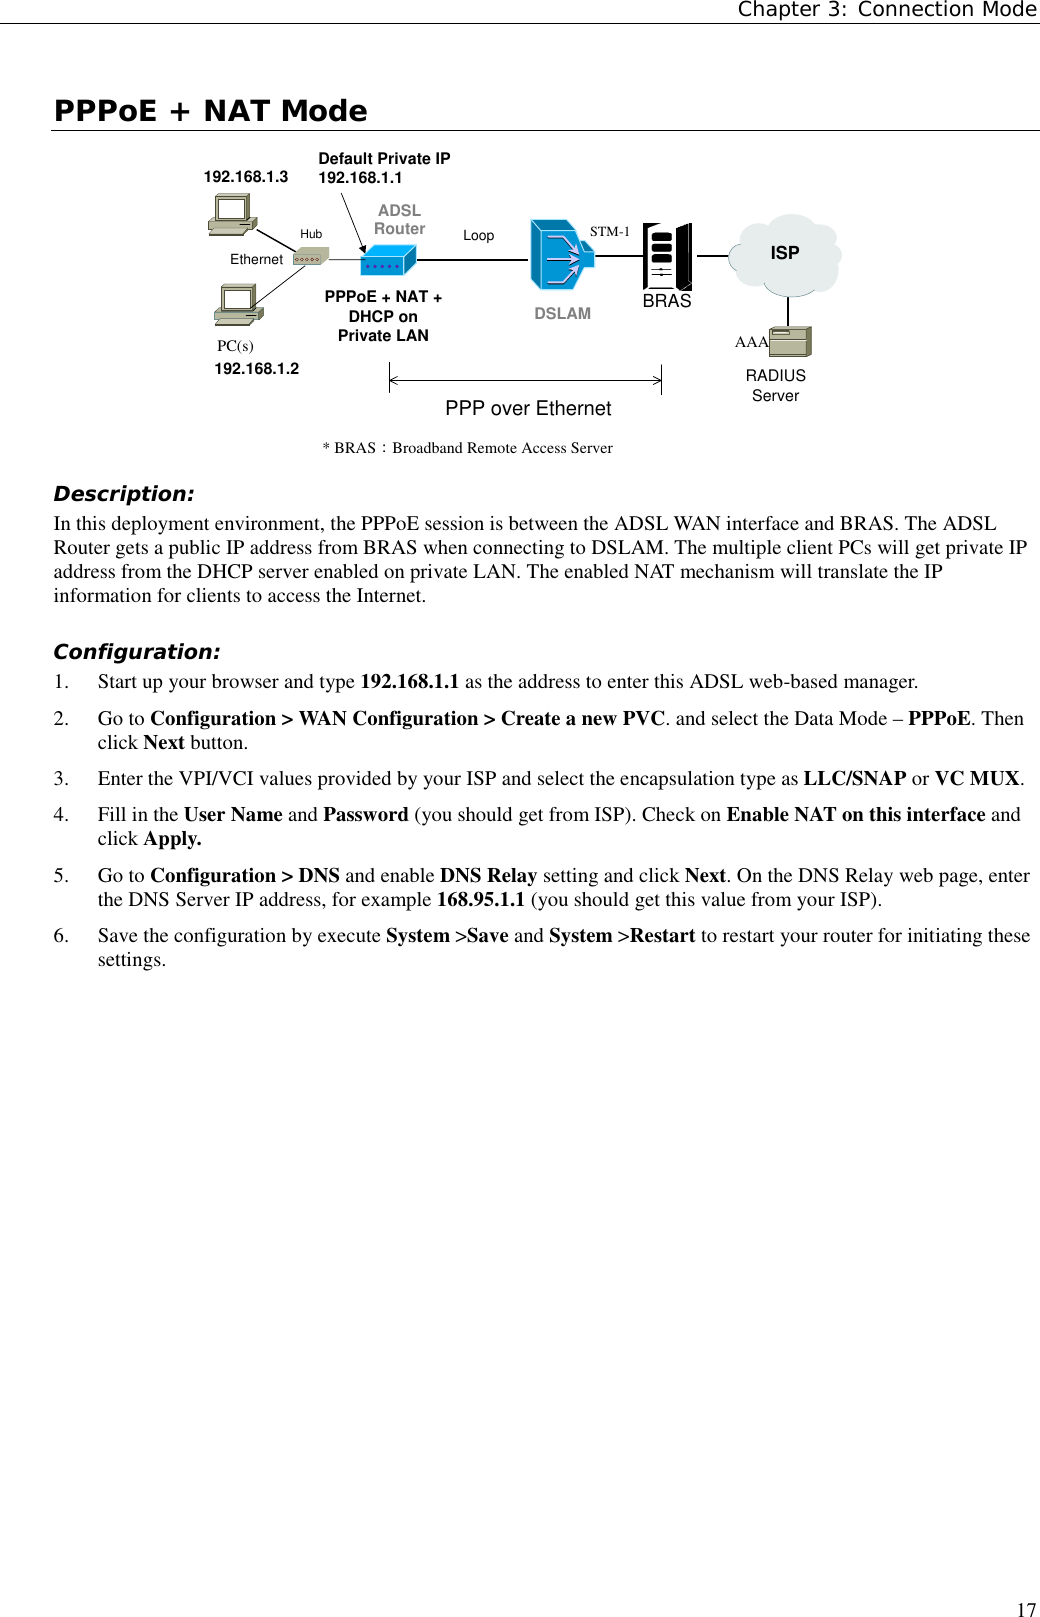 Chapter 3: Connection Mode17PPPoE + NAT Mode    * BRAS：Broadband Remote Access ServerEthernetRADIUSServerPPP over EthernetPPPoE + NAT +DHCP onPrivate LANPC(s)BRASSTM-1DSLAMADSLRouter Loop    ISPDefault Private IP192.168.1.1AAA192.168.1.2192.168.1.3HubDescription:In this deployment environment, the PPPoE session is between the ADSL WAN interface and BRAS. The ADSLRouter gets a public IP address from BRAS when connecting to DSLAM. The multiple client PCs will get private IPaddress from the DHCP server enabled on private LAN. The enabled NAT mechanism will translate the IPinformation for clients to access the Internet.Configuration:1. Start up your browser and type 192.168.1.1 as the address to enter this ADSL web-based manager.2. Go to Configuration &gt; WAN Configuration &gt; Create a new PVC. and select the Data Mode – PPPoE. Thenclick Next button.3. Enter the VPI/VCI values provided by your ISP and select the encapsulation type as LLC/SNAP or VC MUX.4. Fill in the User Name and Password (you should get from ISP). Check on Enable NAT on this interface andclick Apply.5. Go to Configuration &gt; DNS and enable DNS Relay setting and click Next. On the DNS Relay web page, enterthe DNS Server IP address, for example 168.95.1.1 (you should get this value from your ISP).6. Save the configuration by execute System &gt;Save and System &gt;Restart to restart your router for initiating thesesettings.